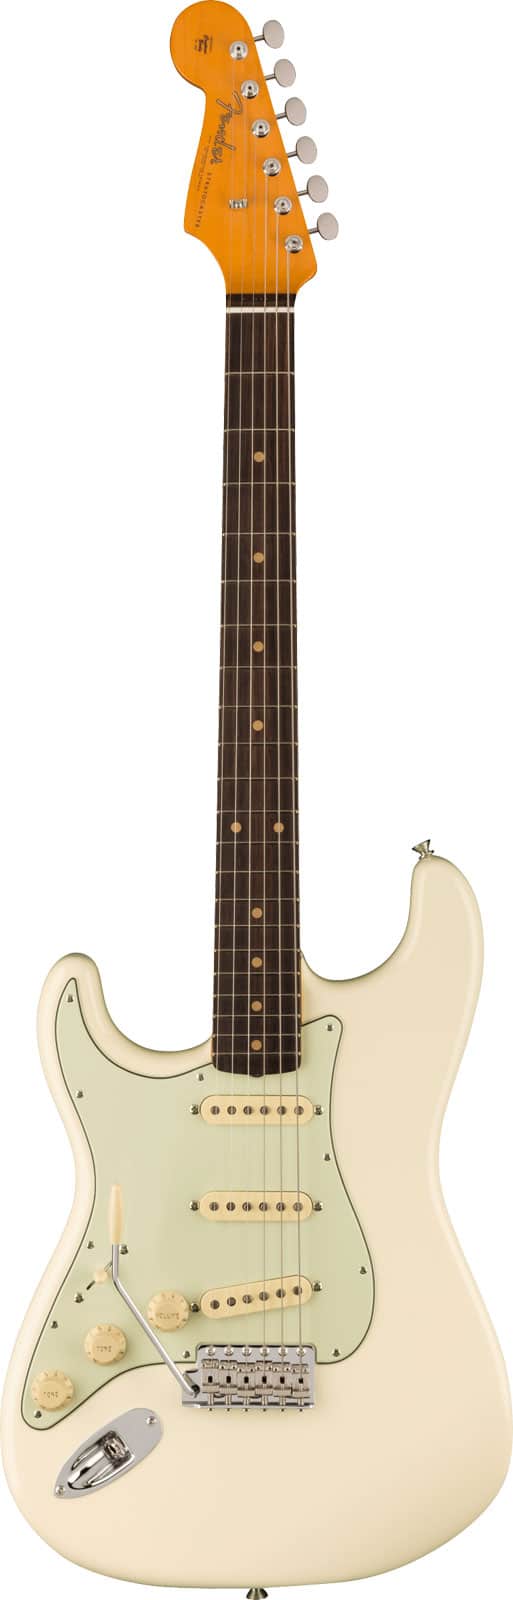 FENDER AMERICAN VINTAGE II 1961 STRATOCASTER LH RW OLYMPIC WHITE